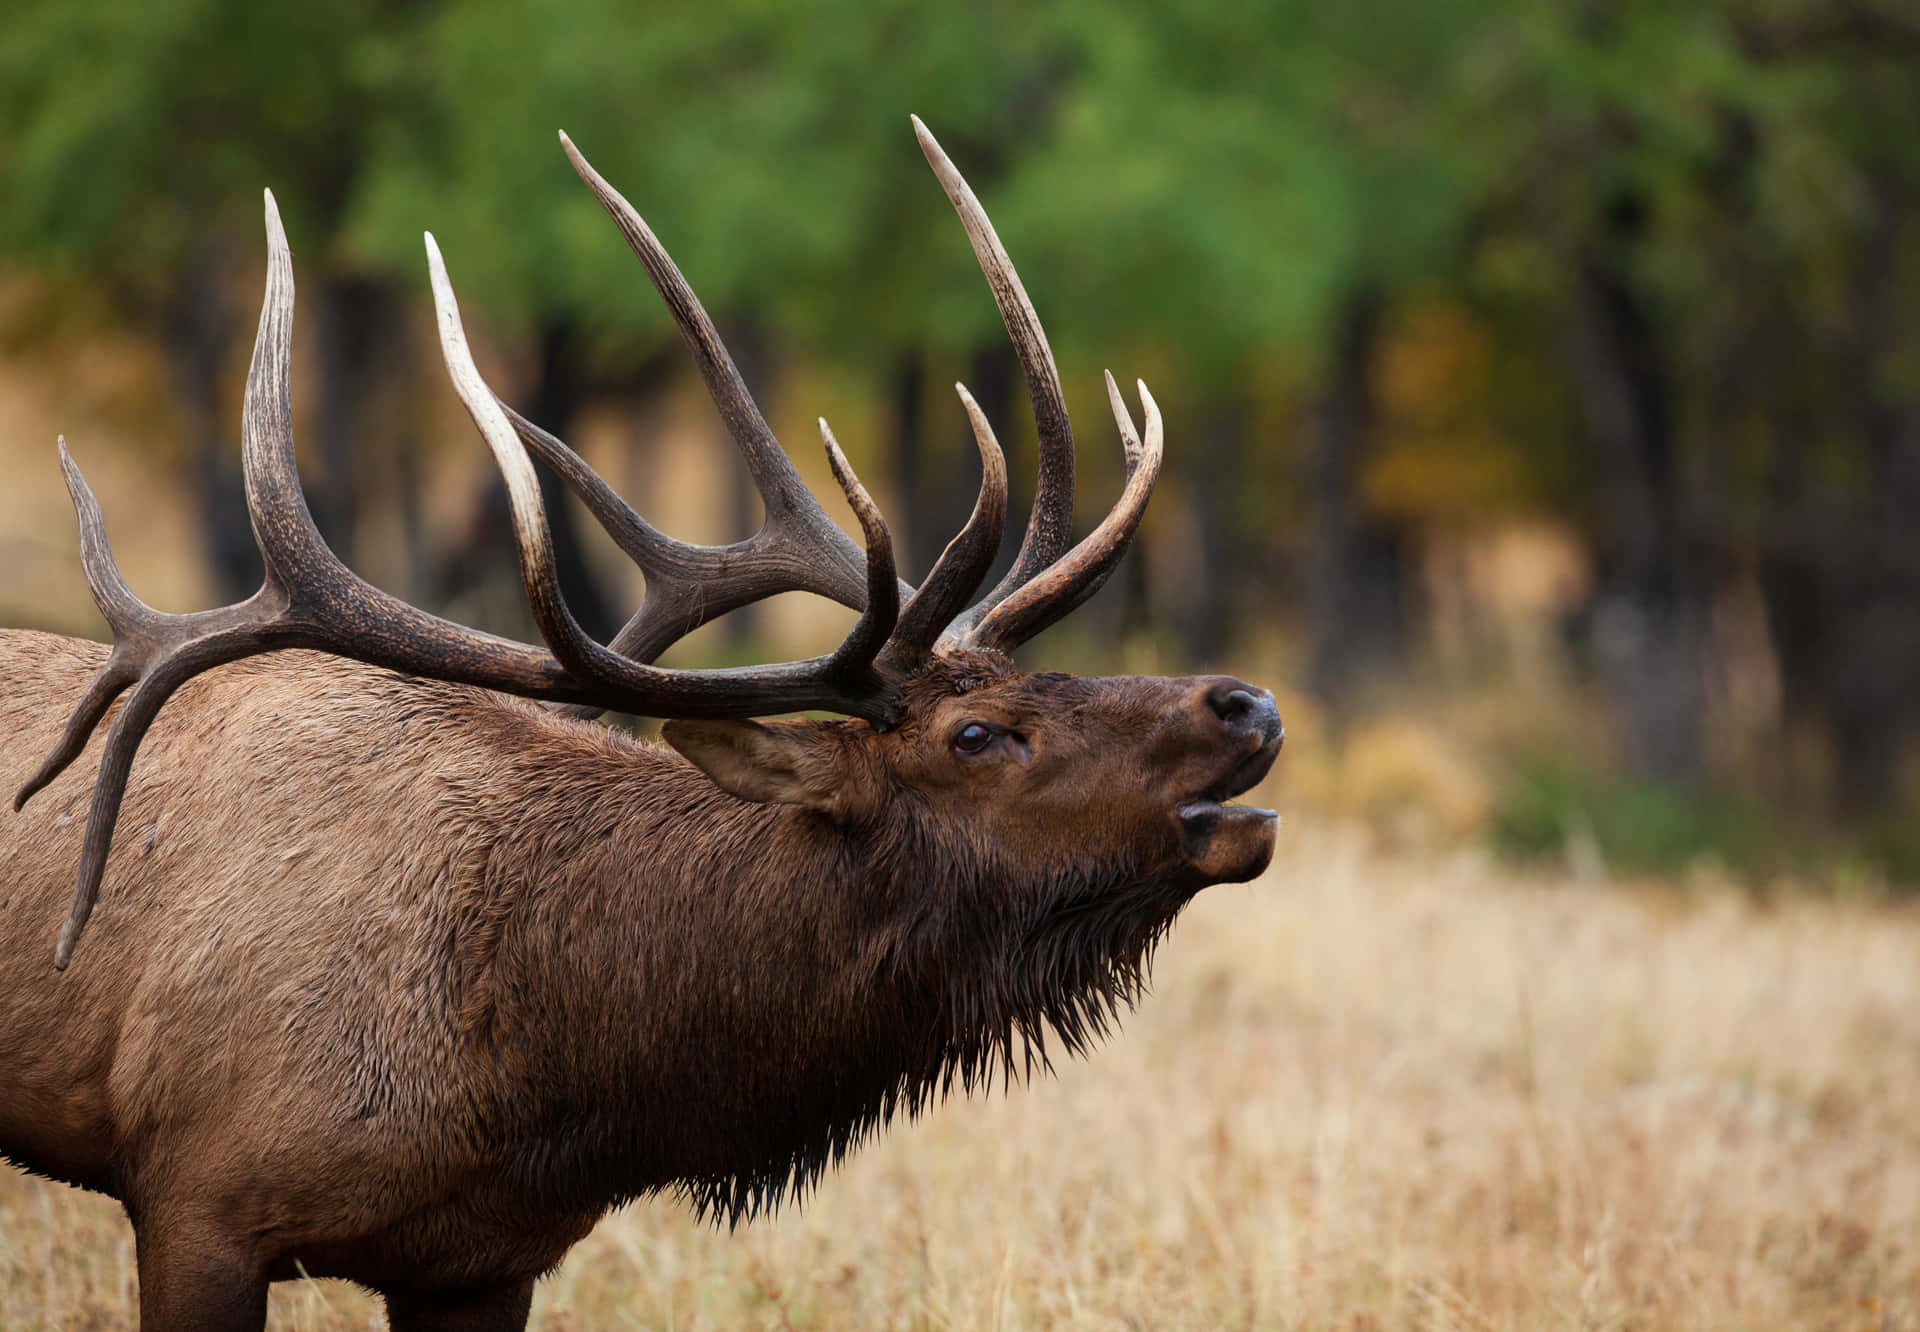 A Large Elk With Large Antlers